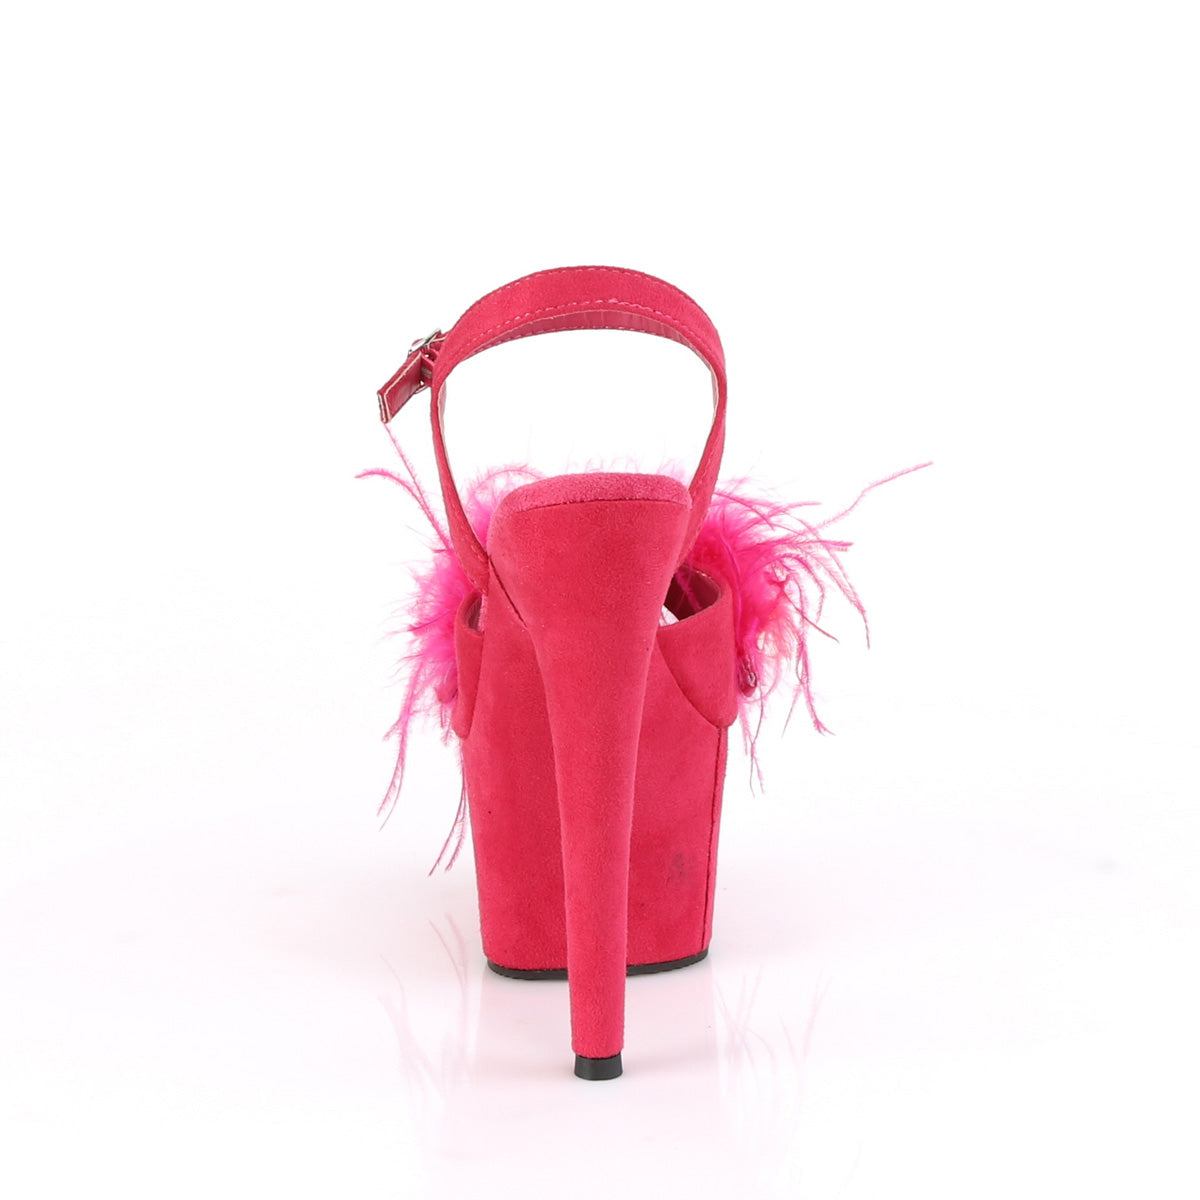 Pleaser Womens Sandals ADORE-709F H. Pink F.Suede-Feather/H. Pink F.Suede